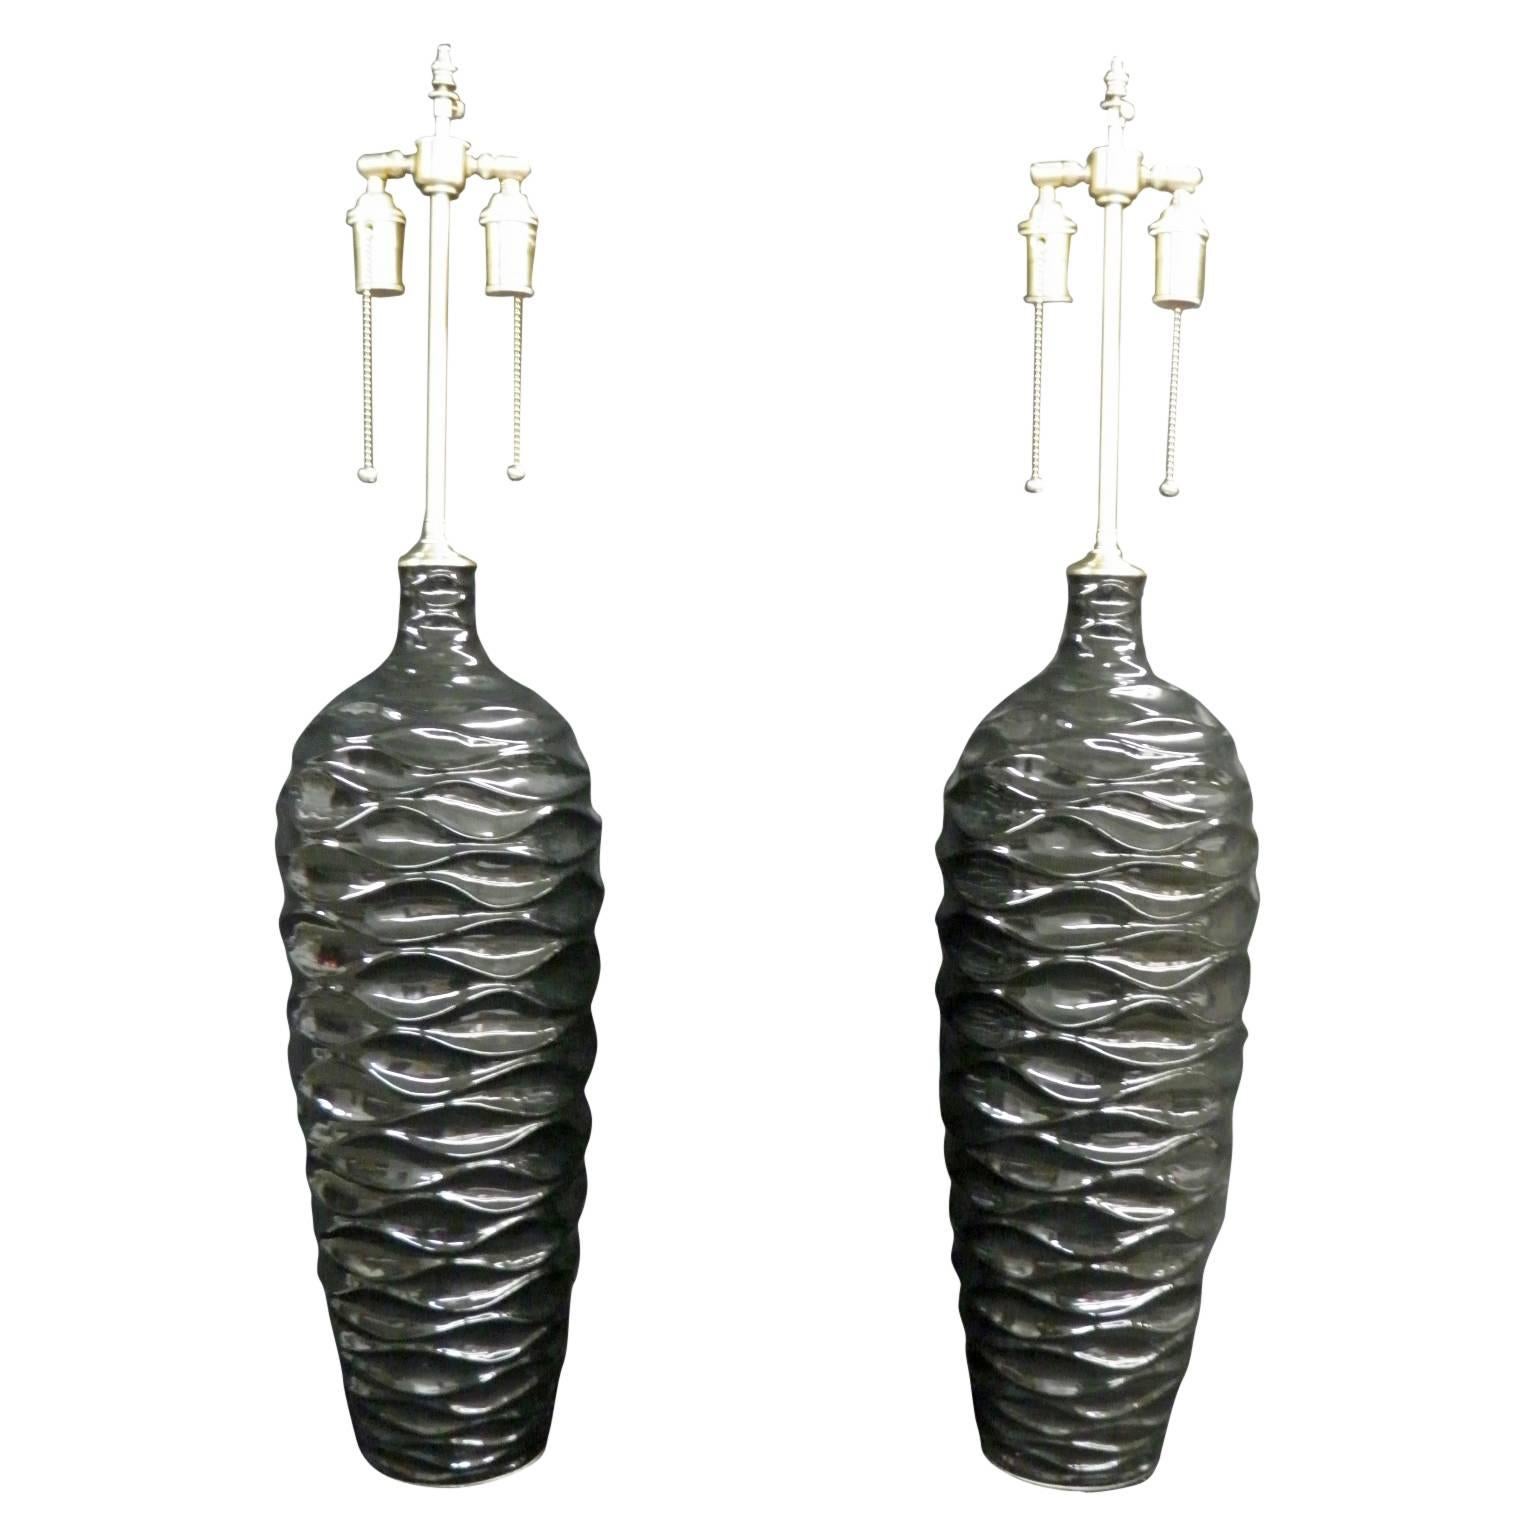 Majestic Pair of "Wave" Pattern Black, Glazed Vessels with Lamp Application